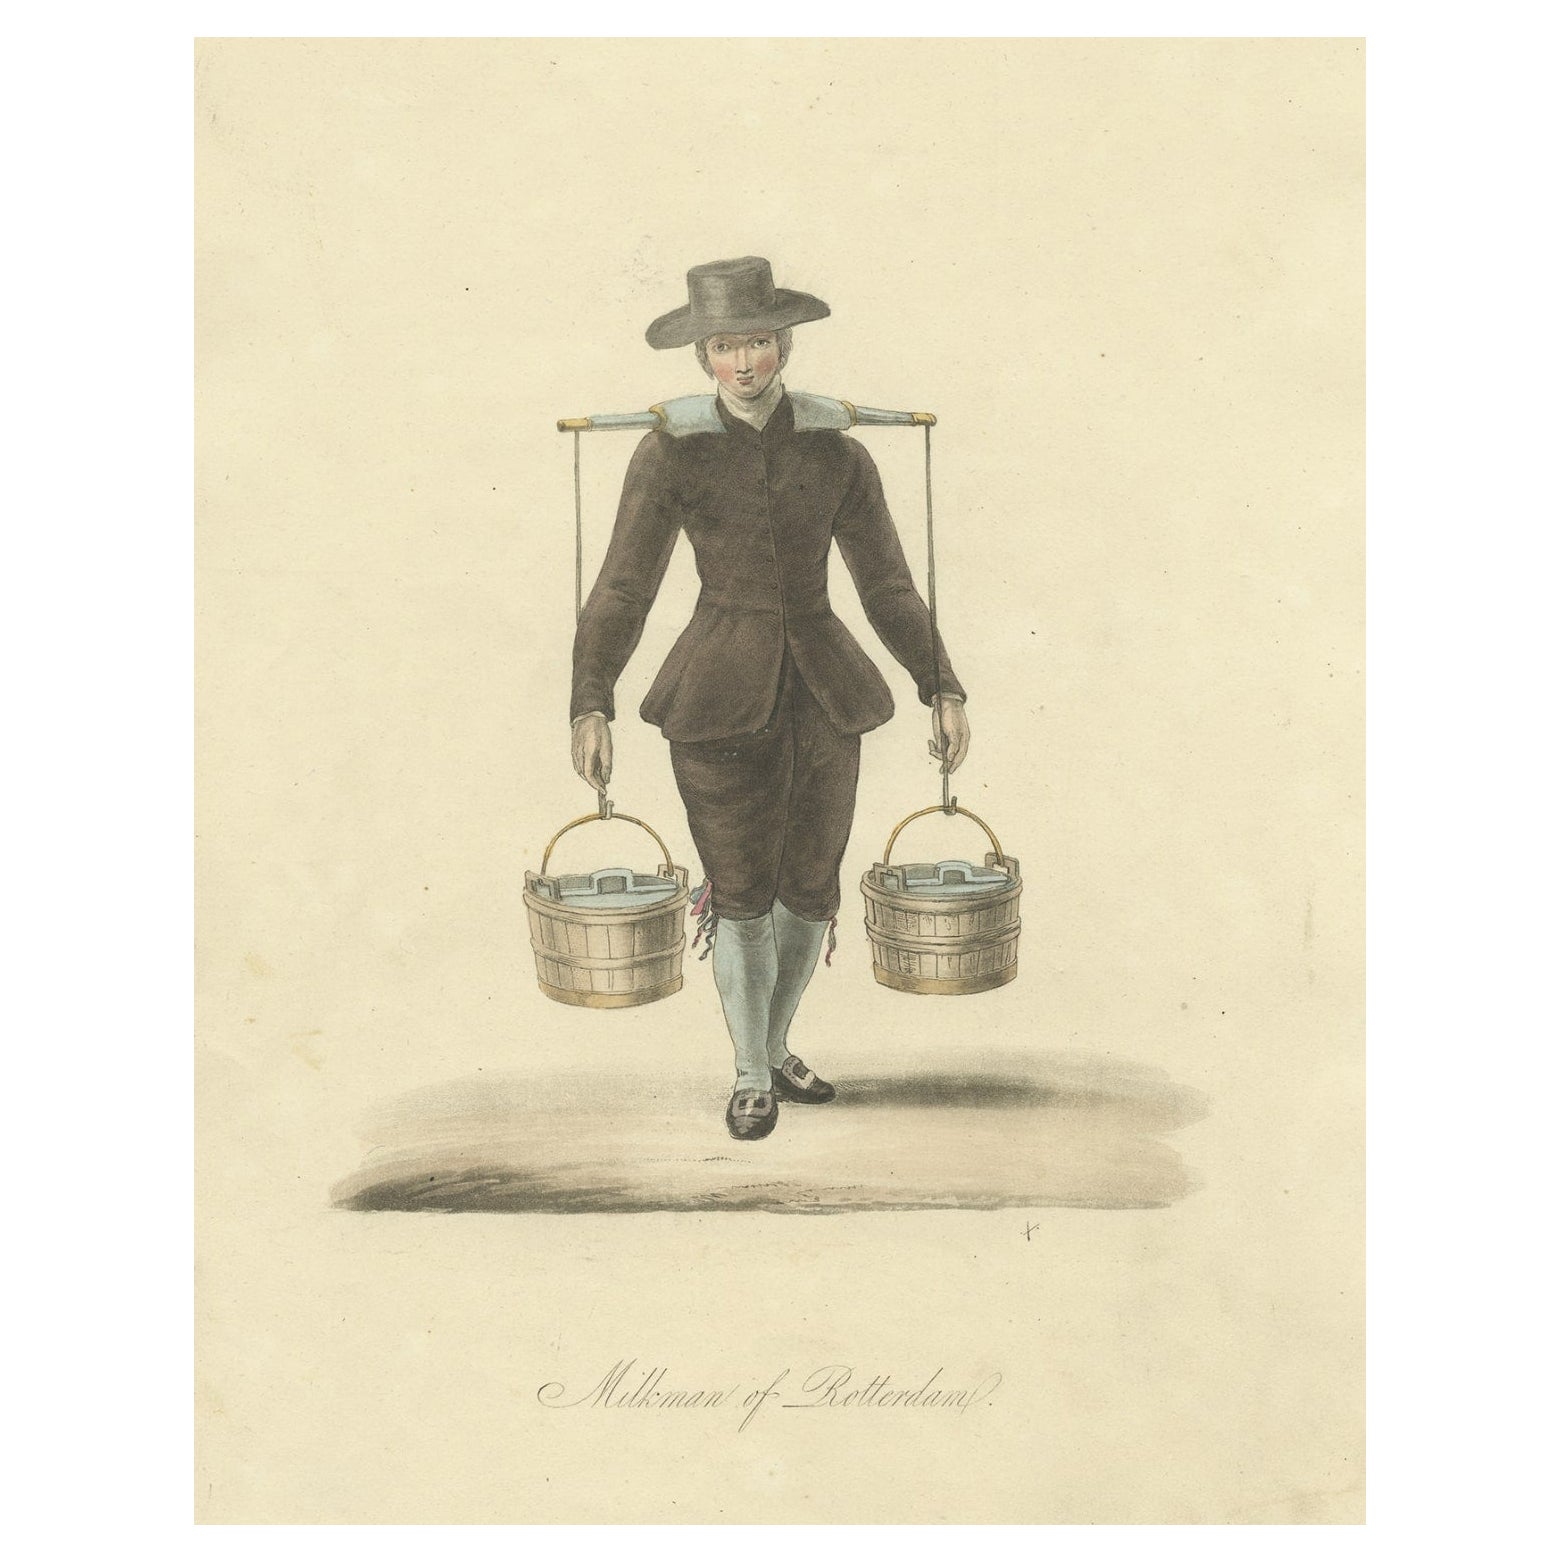 Antique Print of a Milkman of Rotterdam in the Netherlands, 1817